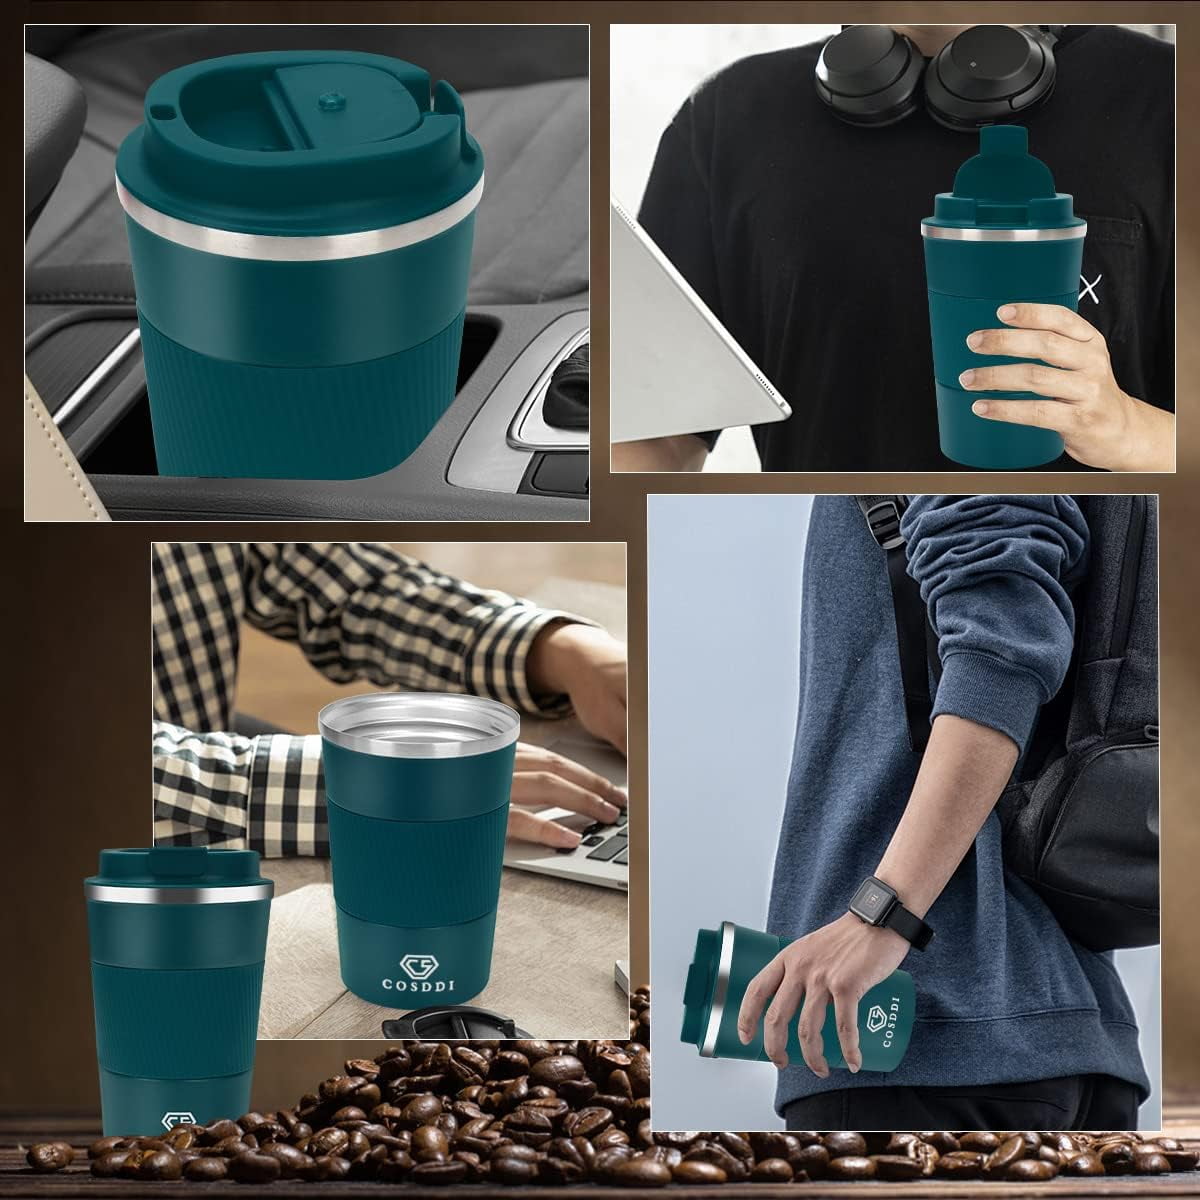  CS COSDDI 12 oz Stainless Steel Vacuum Insulated Tumbler -  Coffee Travel Mug Spill Proof with Lid - Coffee Cups for Keep Hot/Ice  Coffee,Tea and Beer (Green) : Home & Kitchen